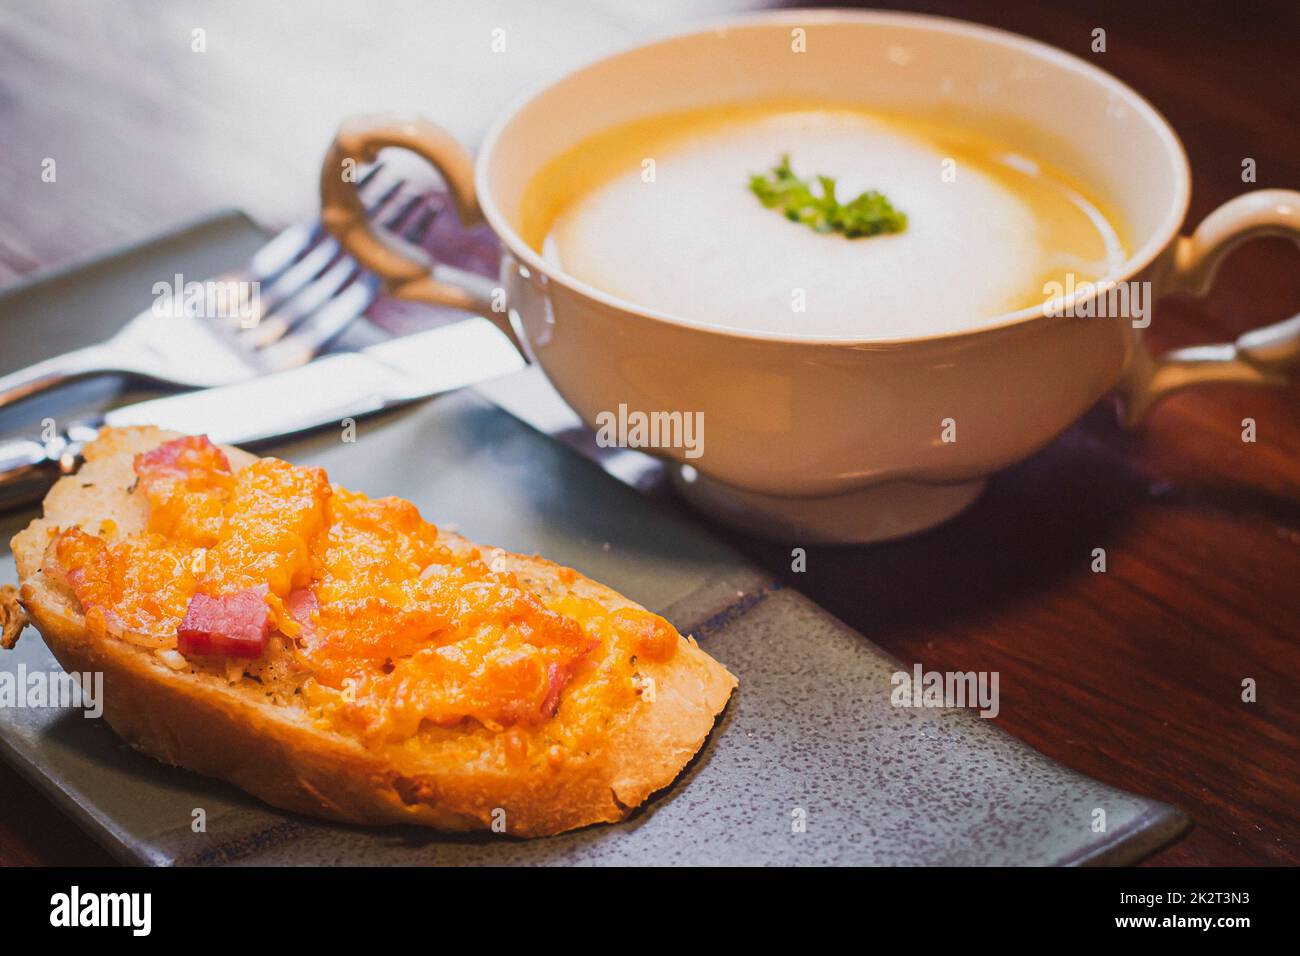 Mushroom Soup With Garlic Bread healthy beakfast in caramic blow and plate object still life. Stock Photo